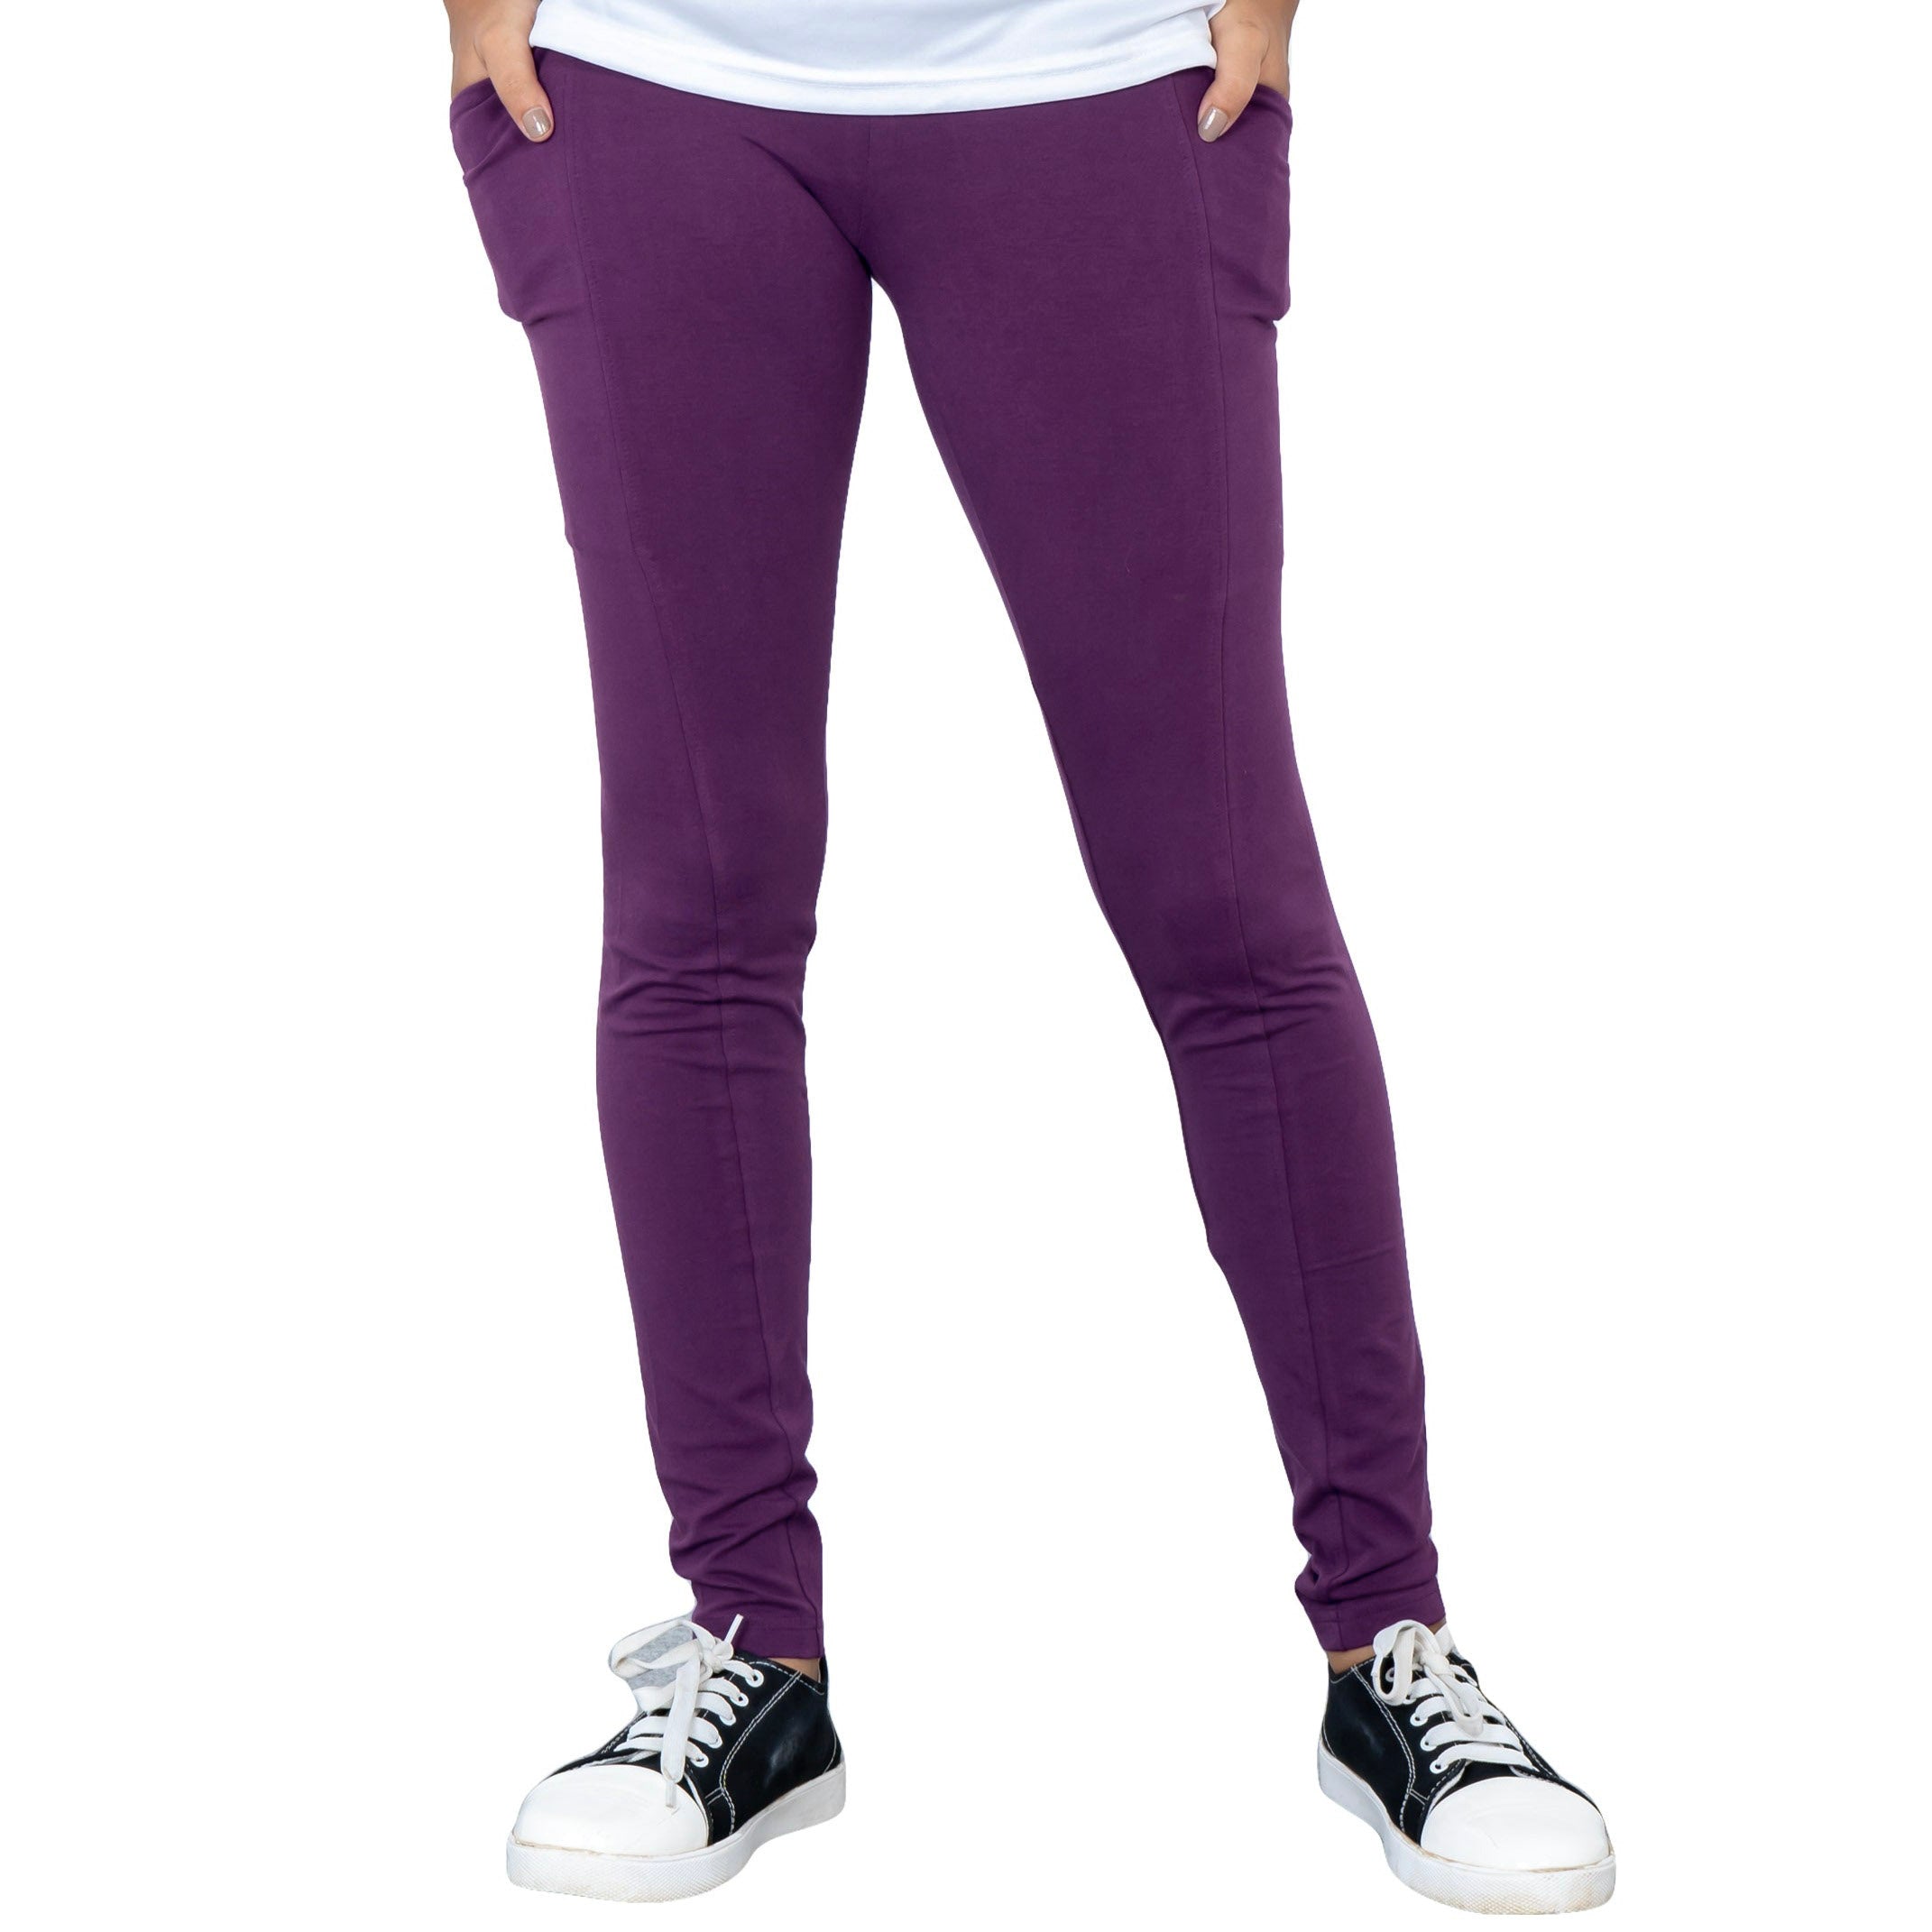 Plum Adults Leggings with Pockets